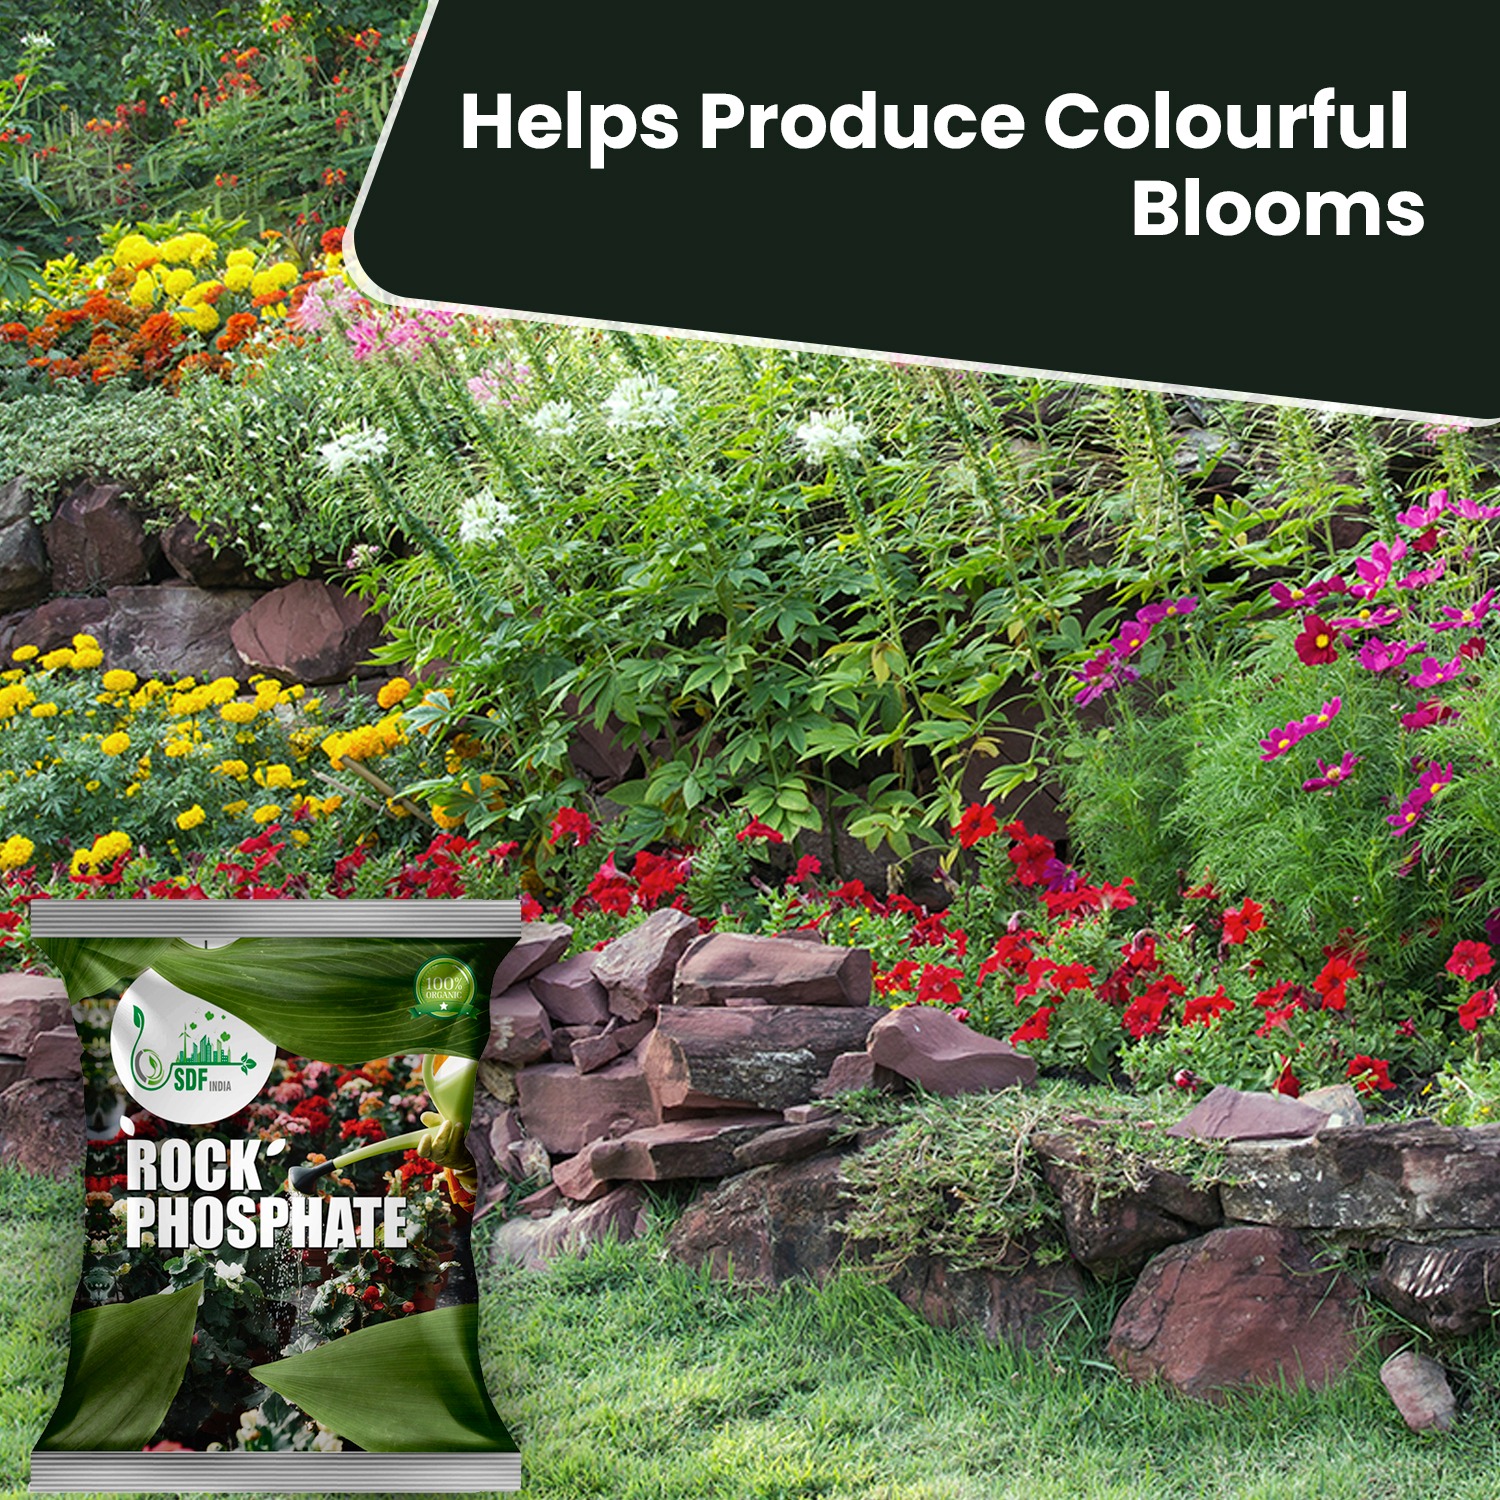 6056 SDFINDIA Organic Rock Phosphate Essential Fertilizer all  Purpose Powder for Fruiting & Flowering  Plants ( 10kg )(SDFindiaRP10K)(6056_rock phas_10kg)